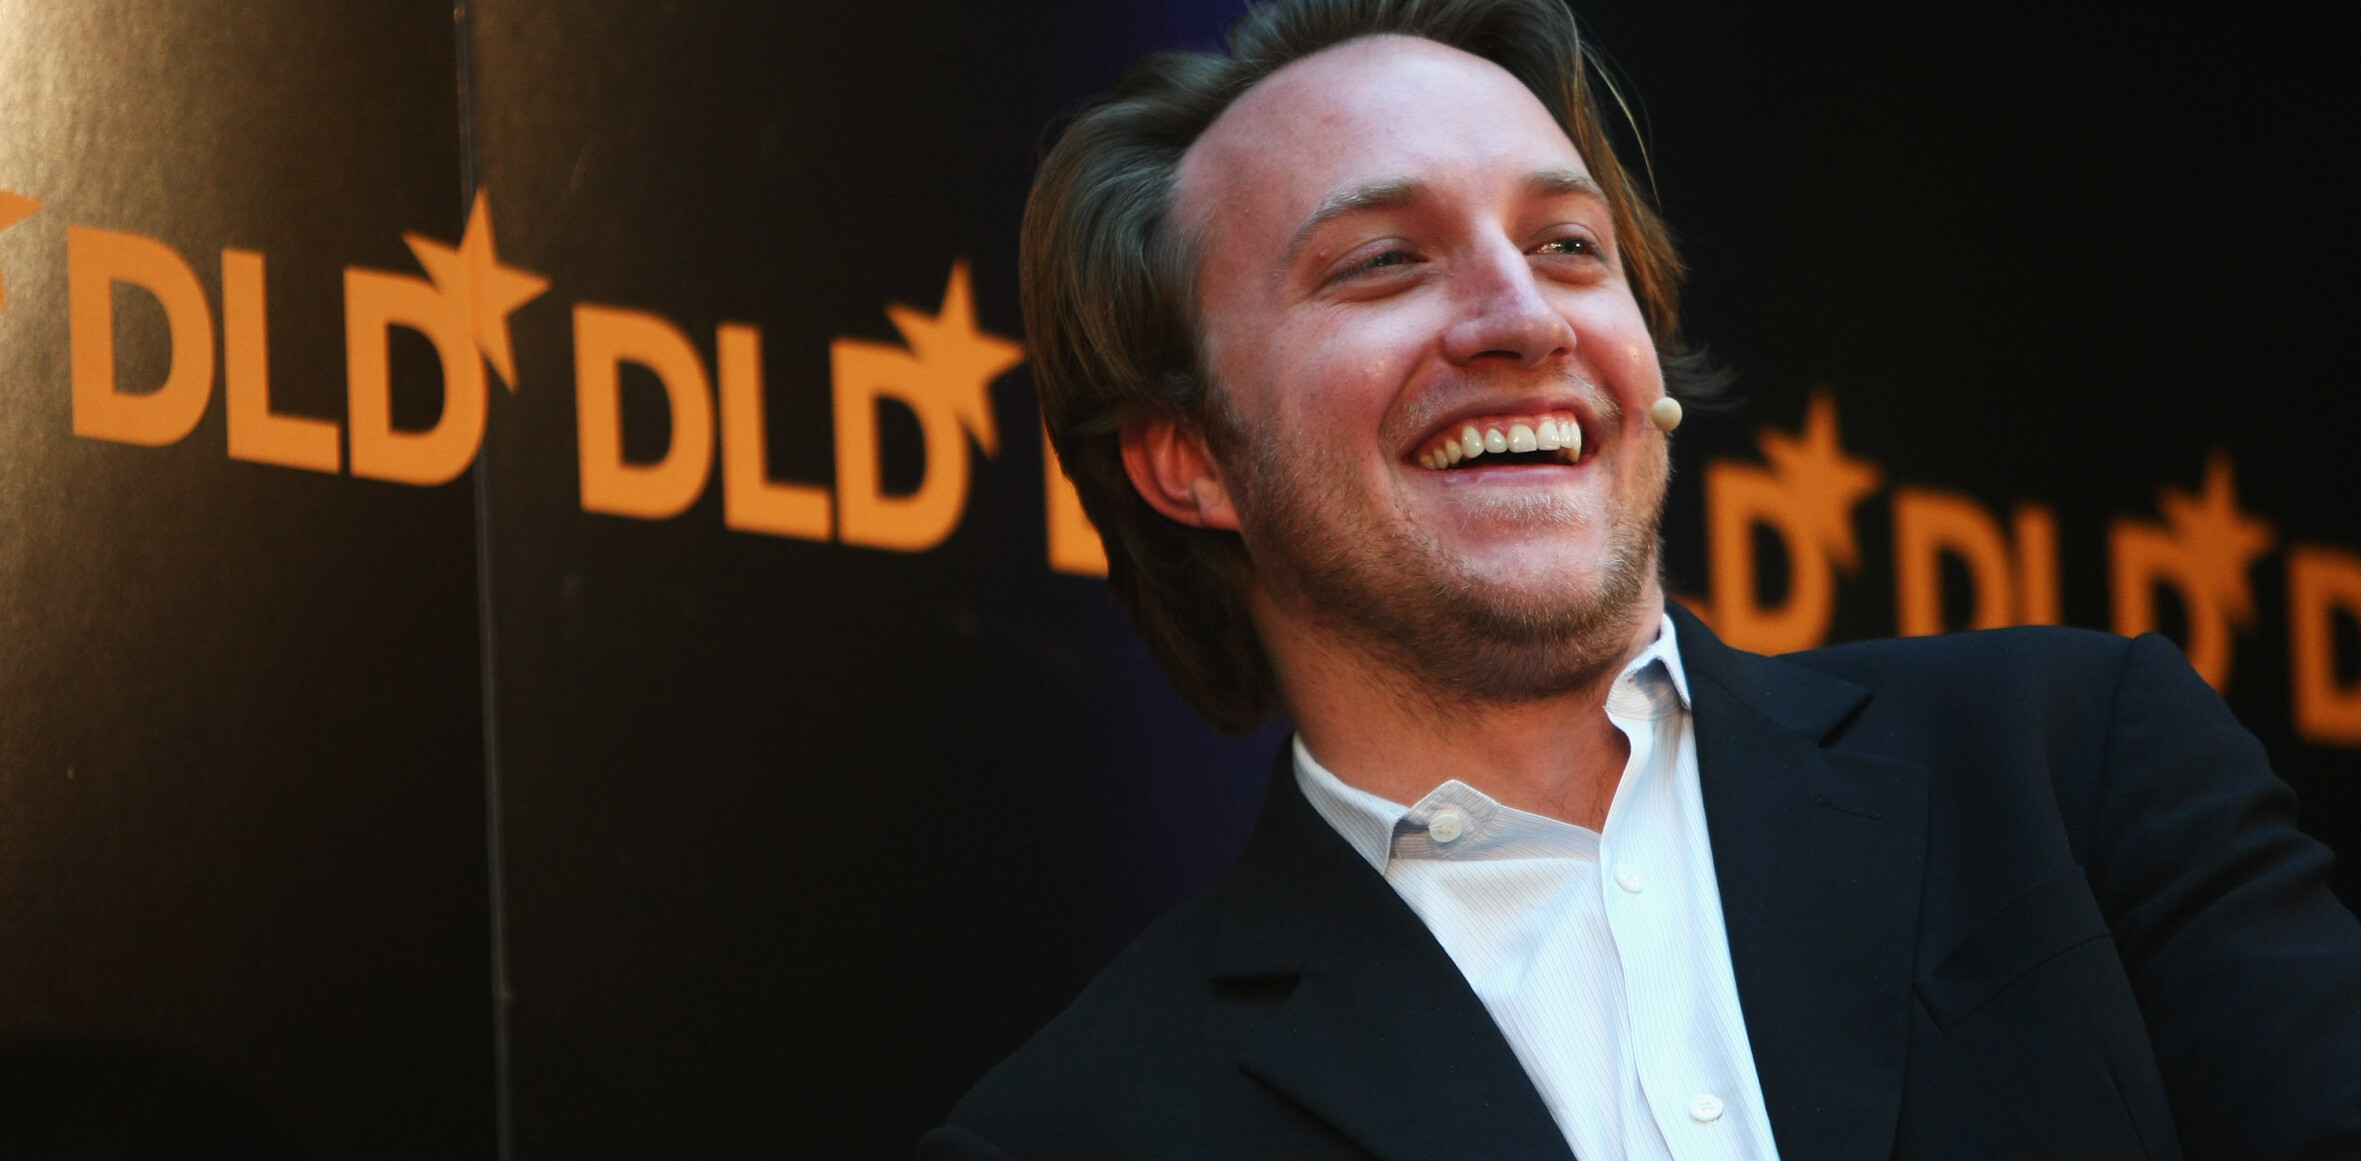 YouTube co-founder Chad Hurley teases MixBit, a new collaborative online video platform